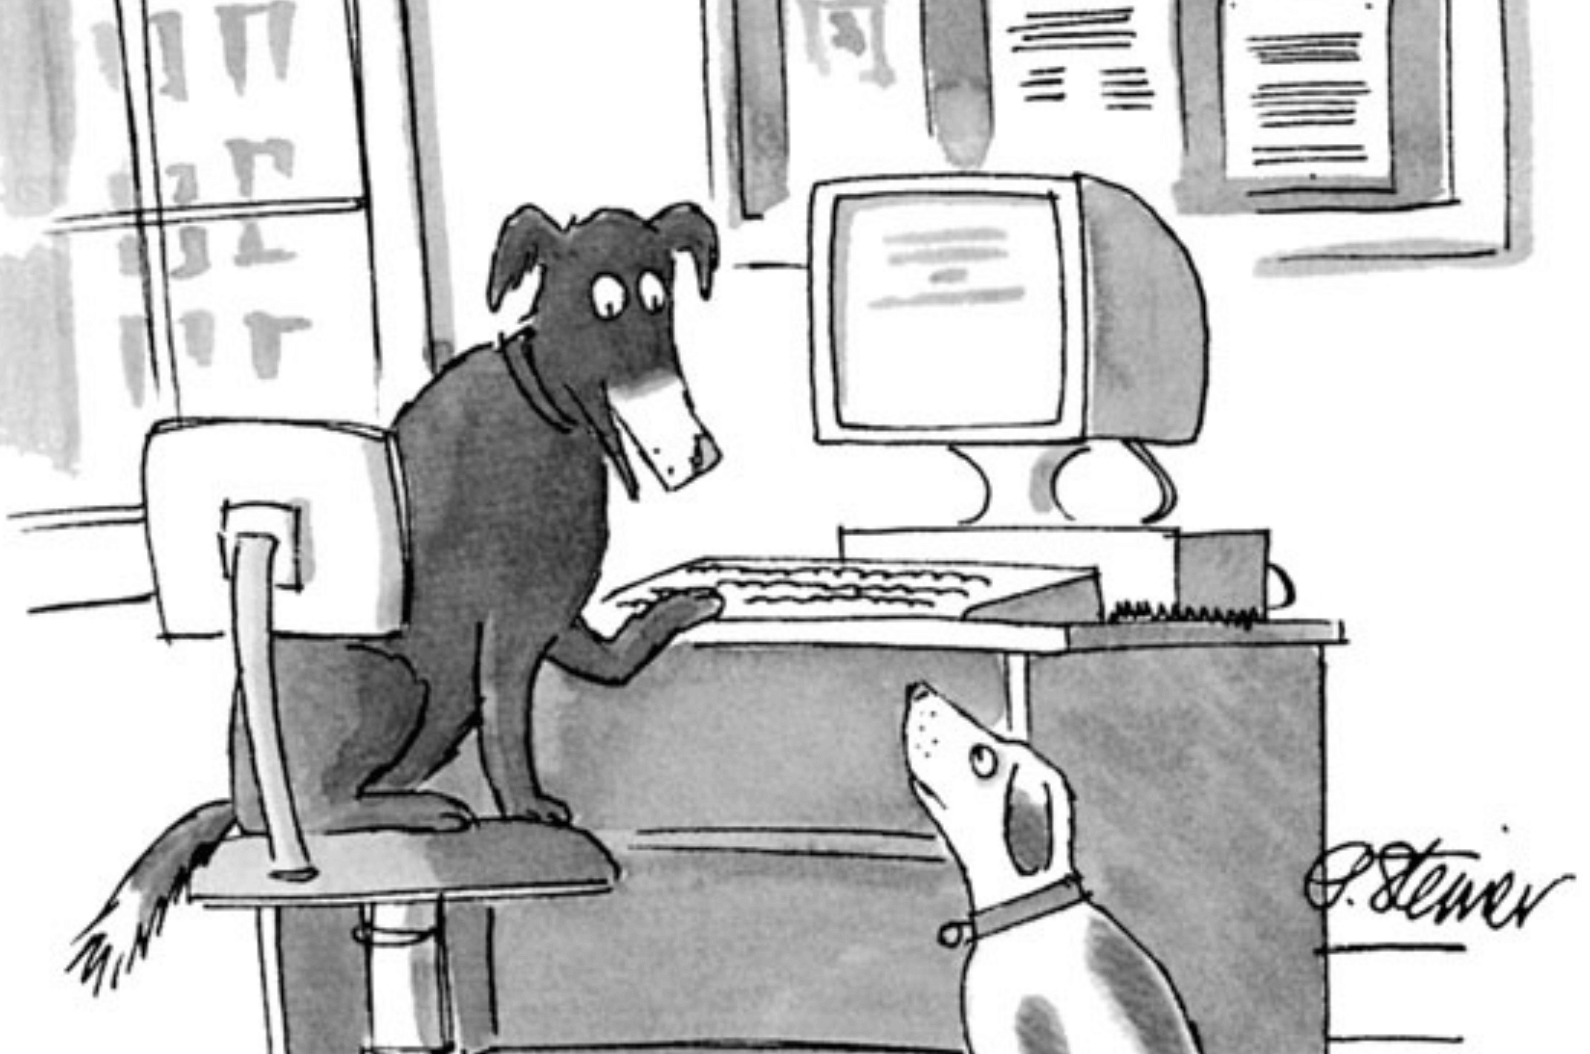 Peter Steiner’s New Yorker cartoon, “On The Internet, Nobody Knows You're A Dog”